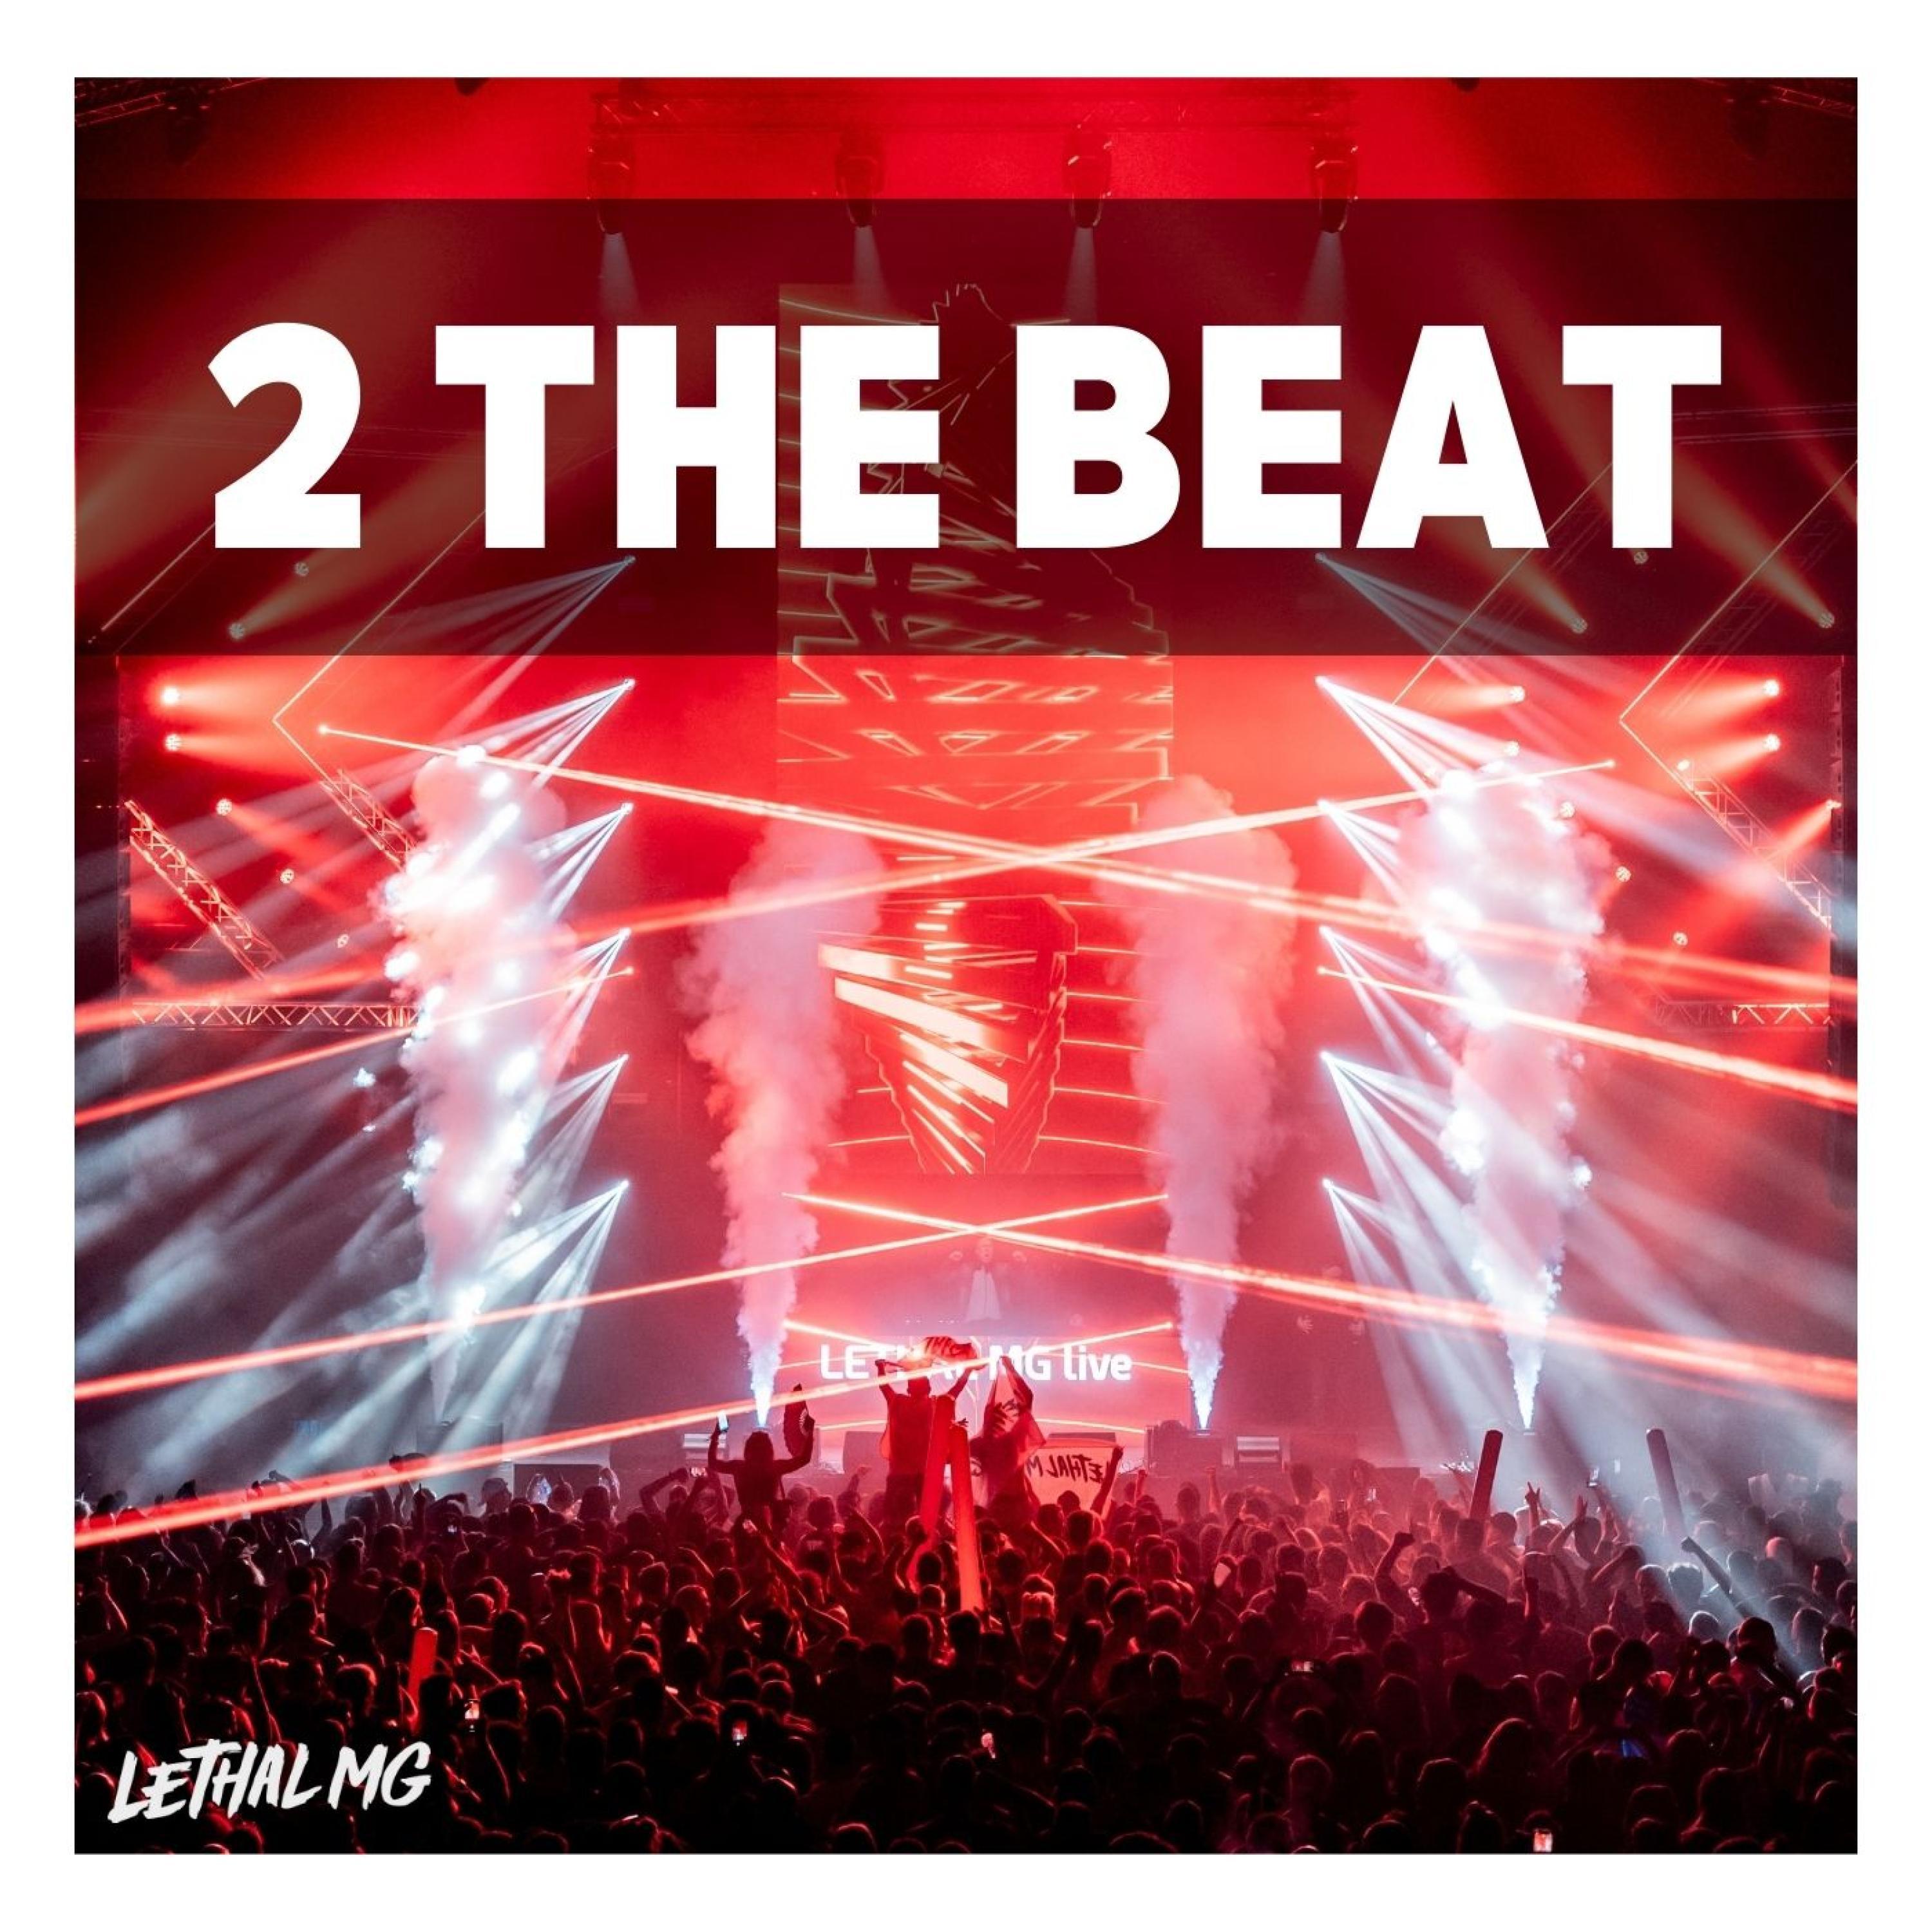 Lethal MG - 2 The Beat